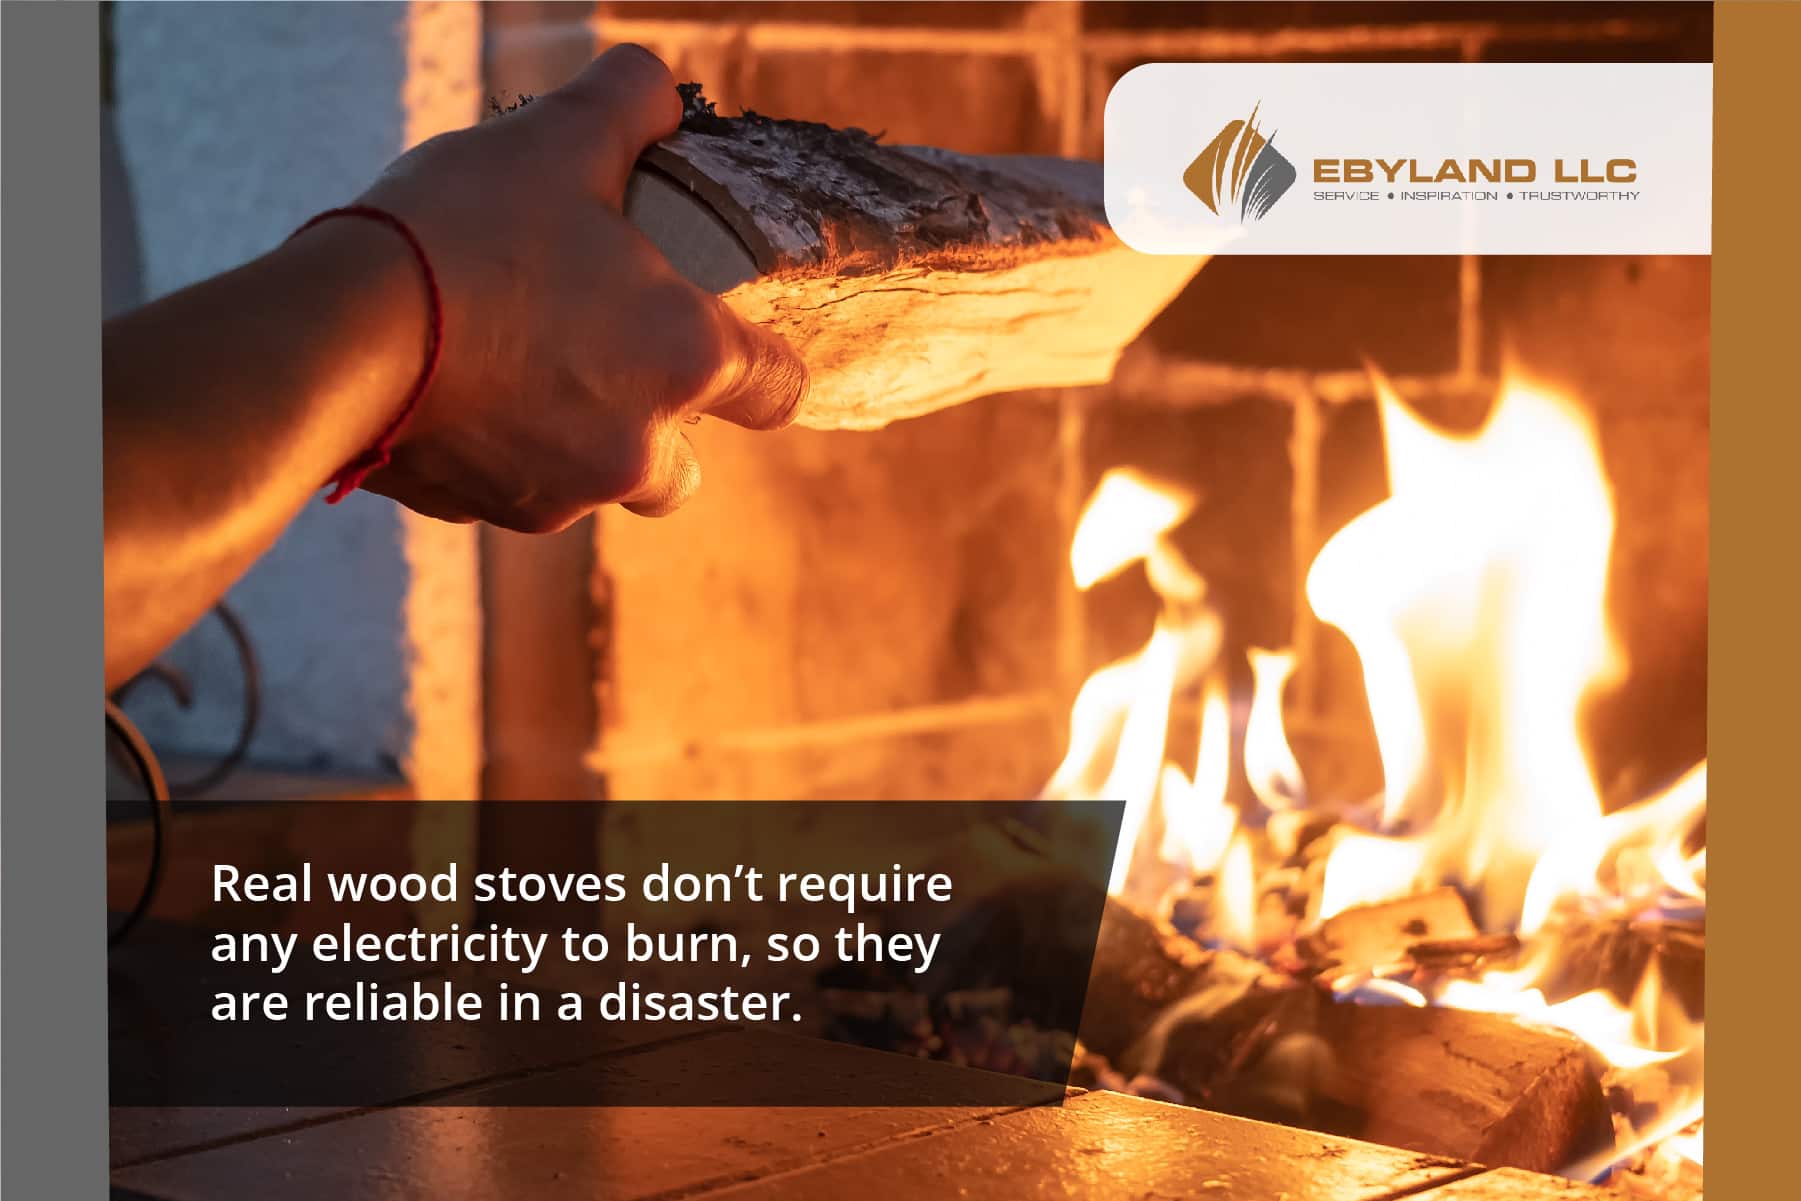 wood stoves don't require electricity to burn